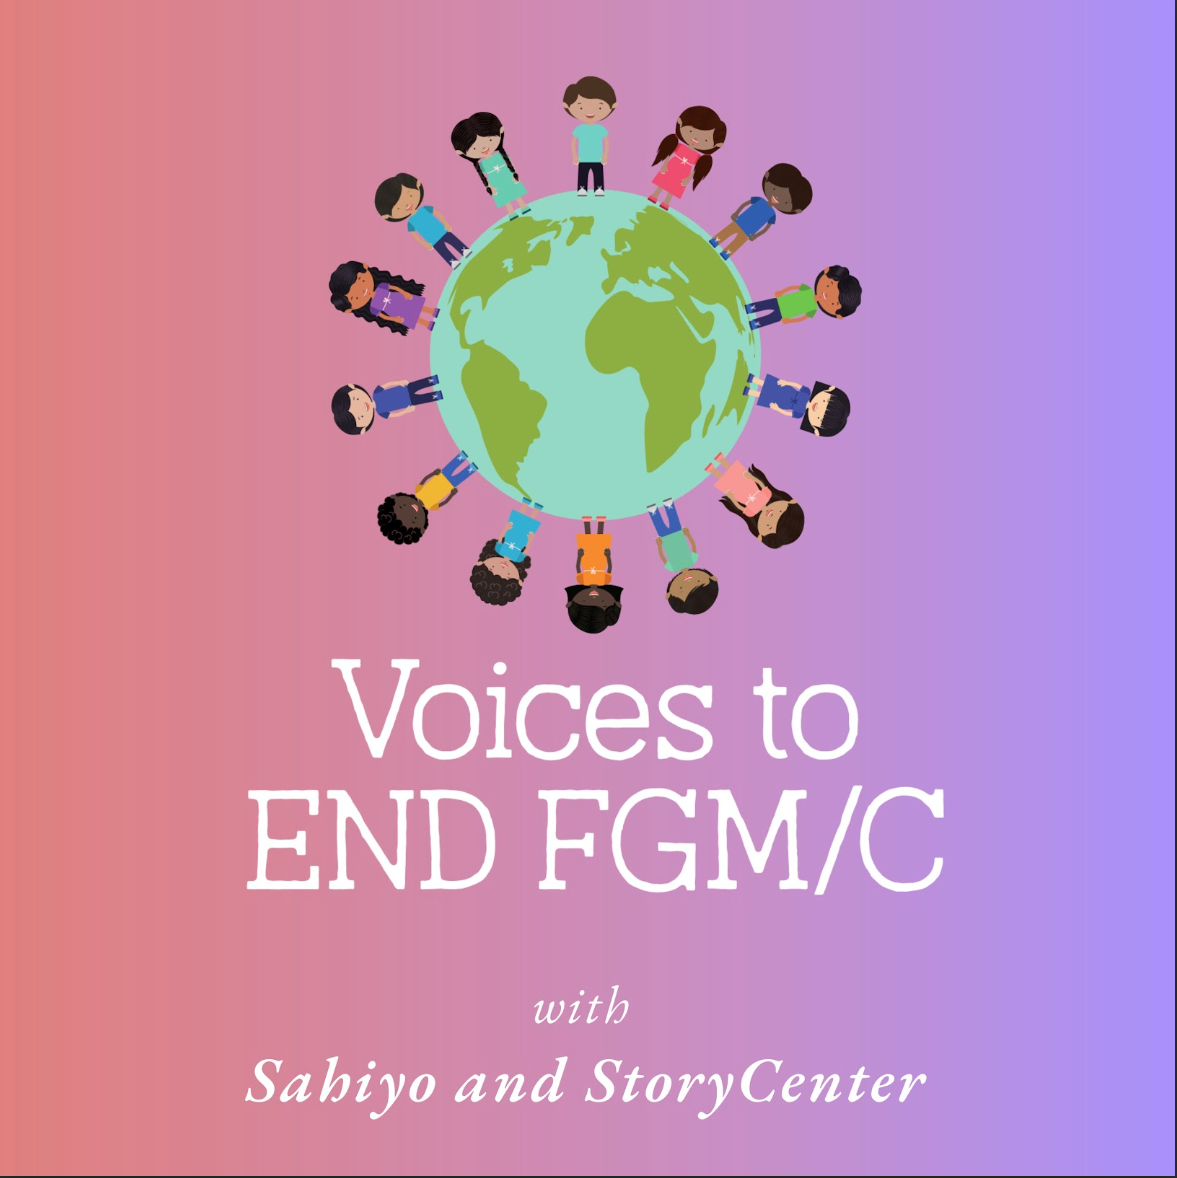 NEW Voices to End FGM/C Podcast! 